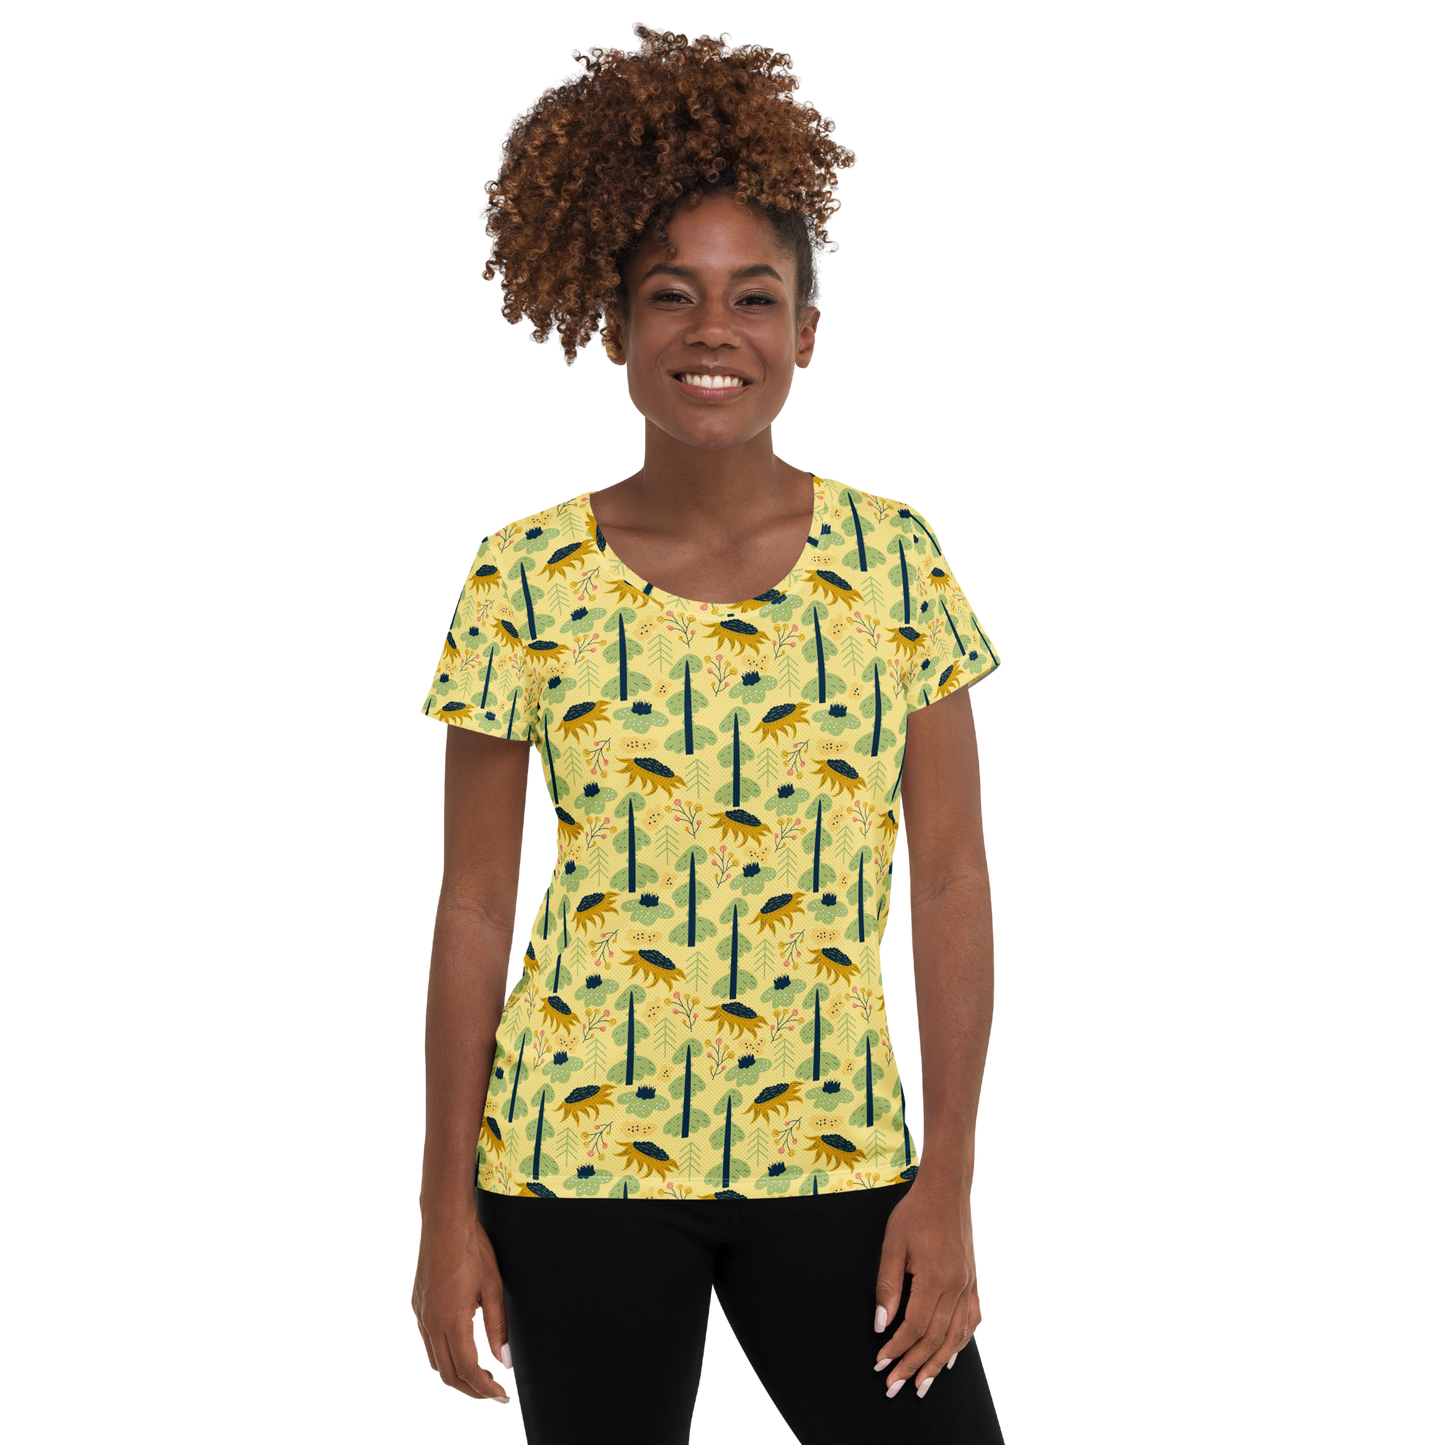 Scandinavian Spring Floral | Seamless Patterns | All-Over Print Women's Athletic T-Shirt - #1